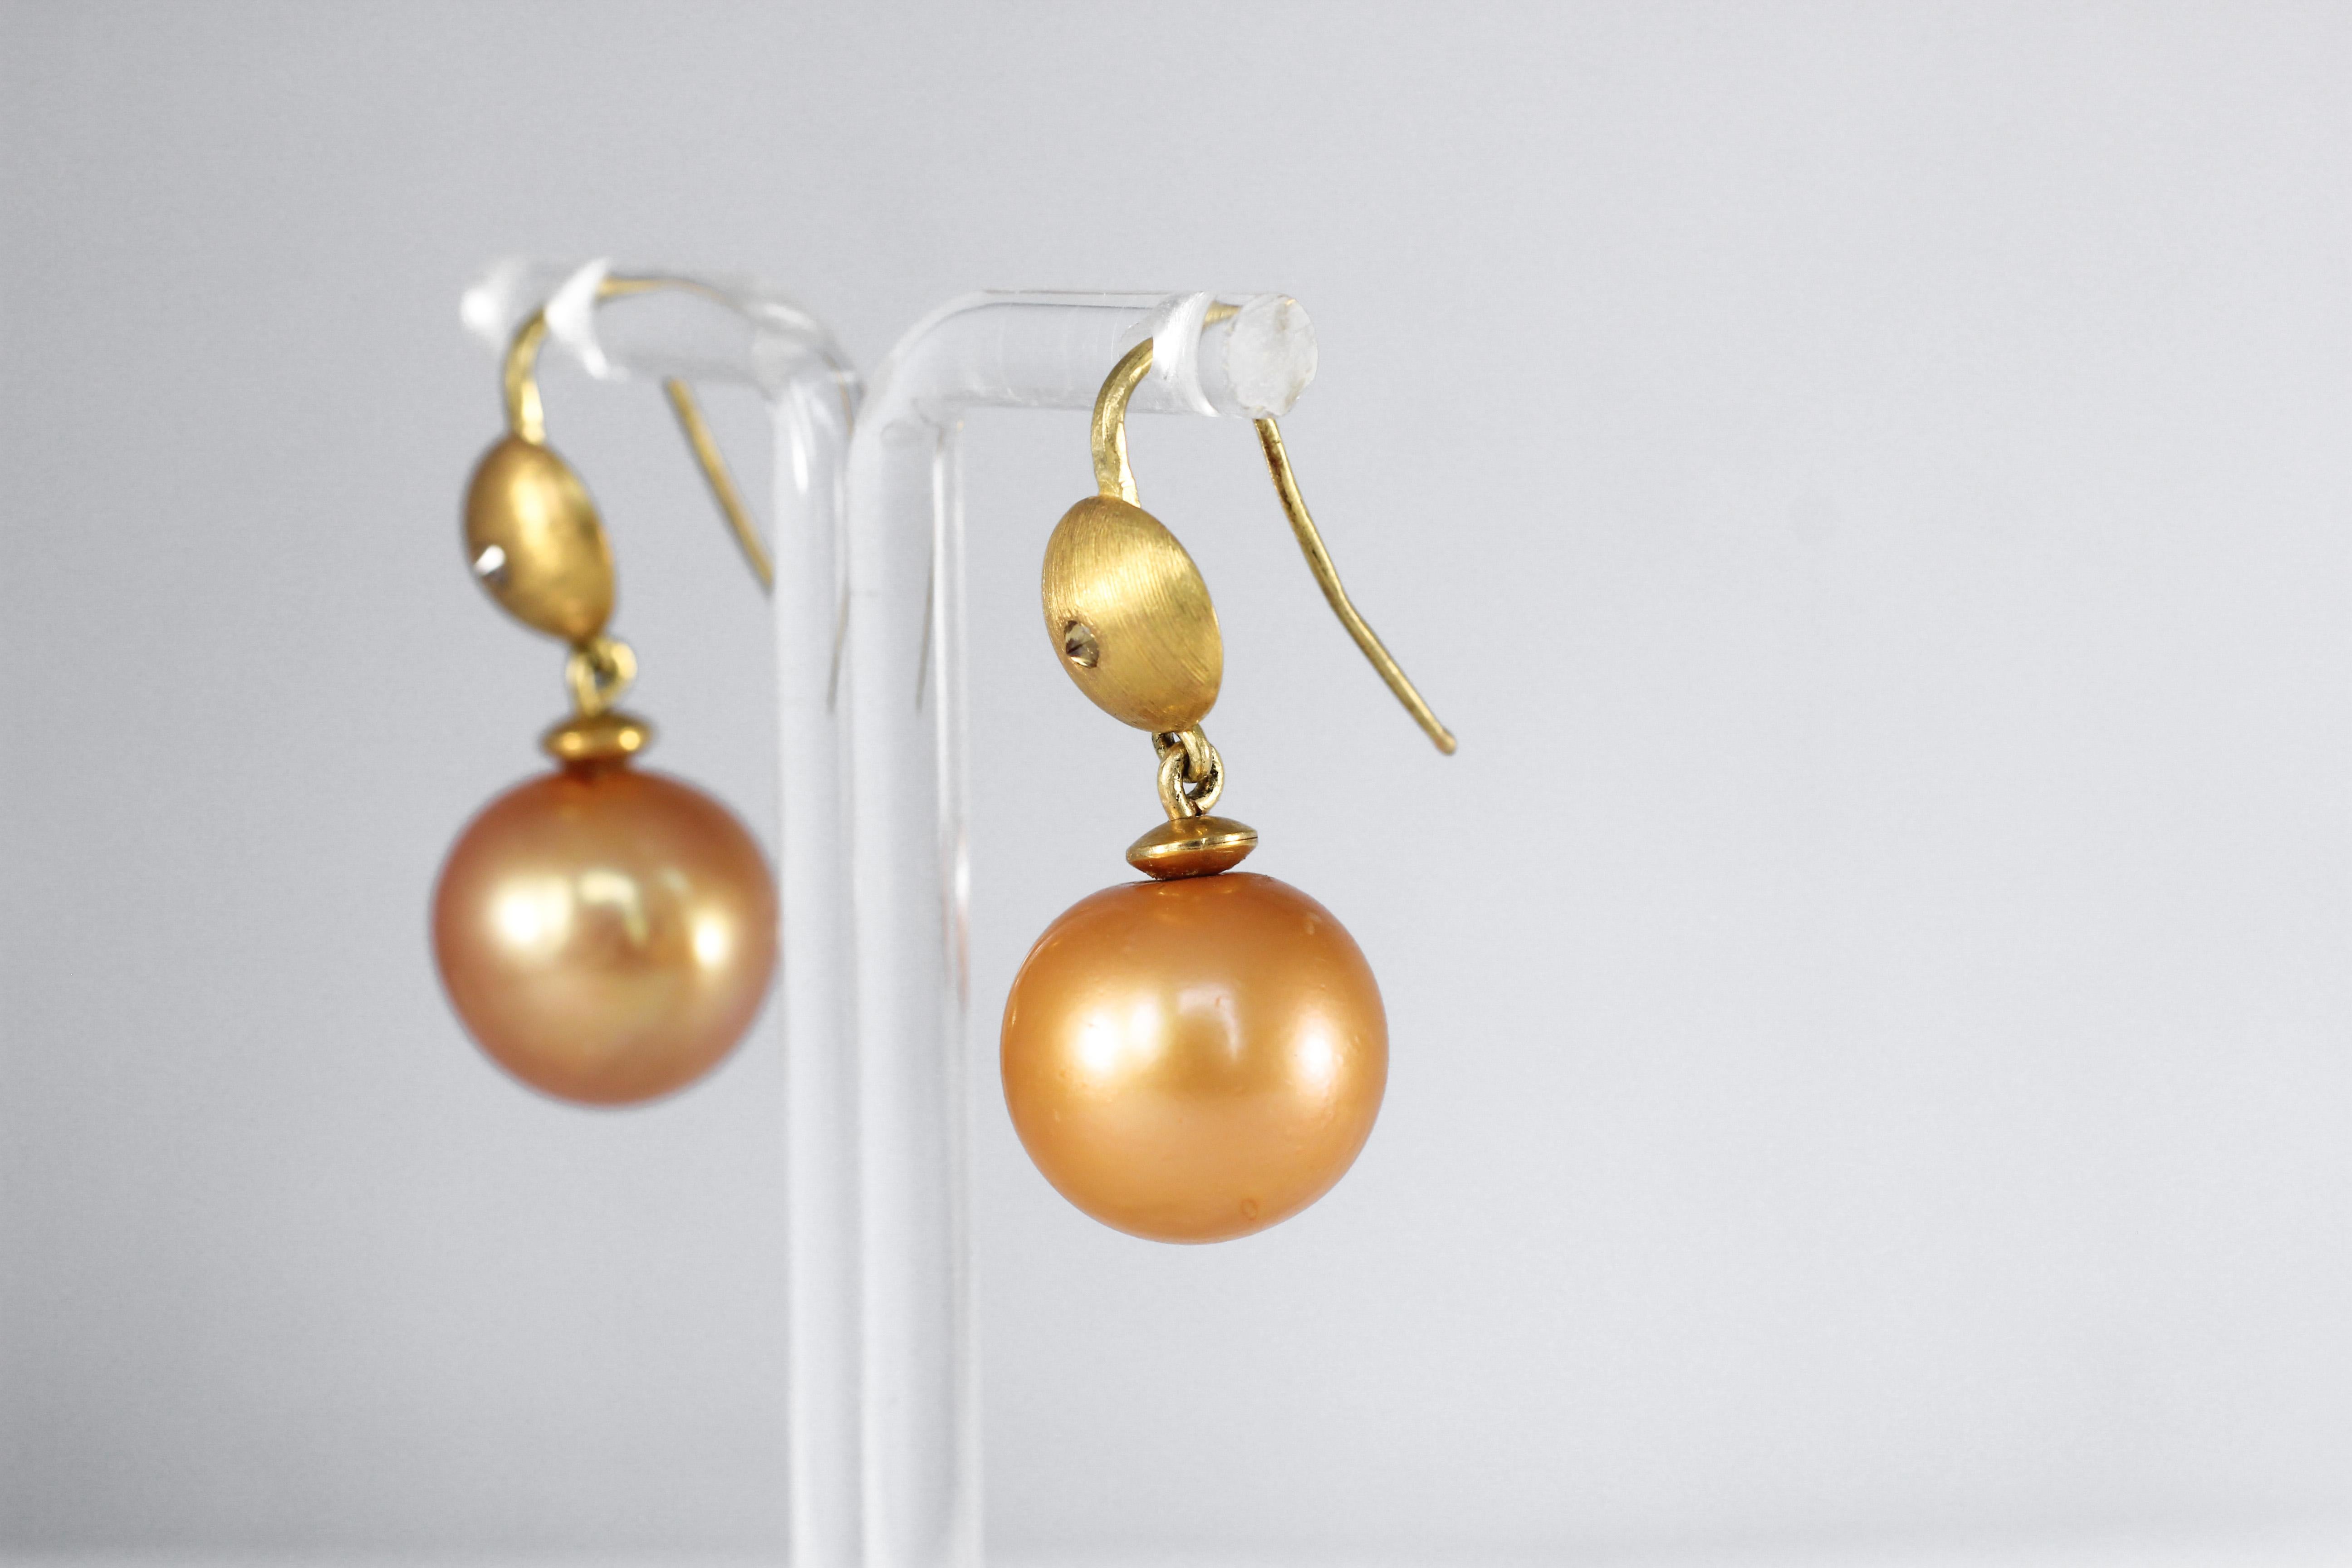 Golden Eve Drop Earrings. Custom listing. These 21K gold elegant contemporary dangle earrings are an update to an all-time classic. Nature's marvel, a large 15mm golden-orange South Sea Pearl is reflected in an engraved golden hemisphere and is